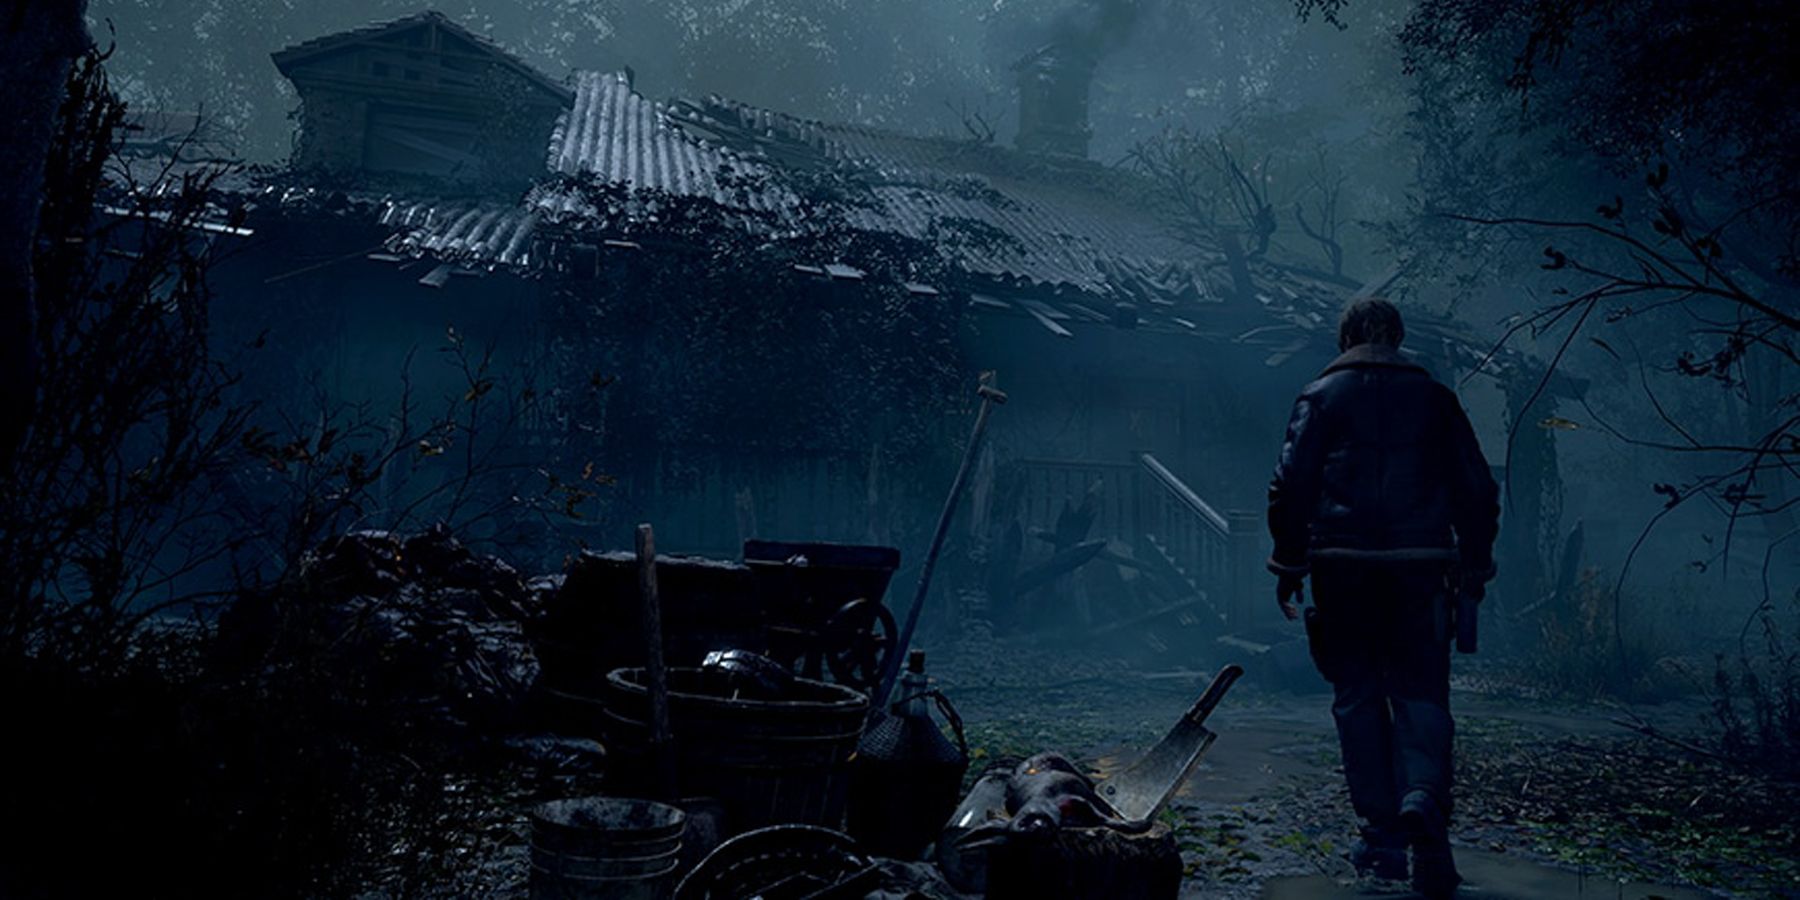 Resident Evil 4 Remake Leon Kennedy approaching a runied house